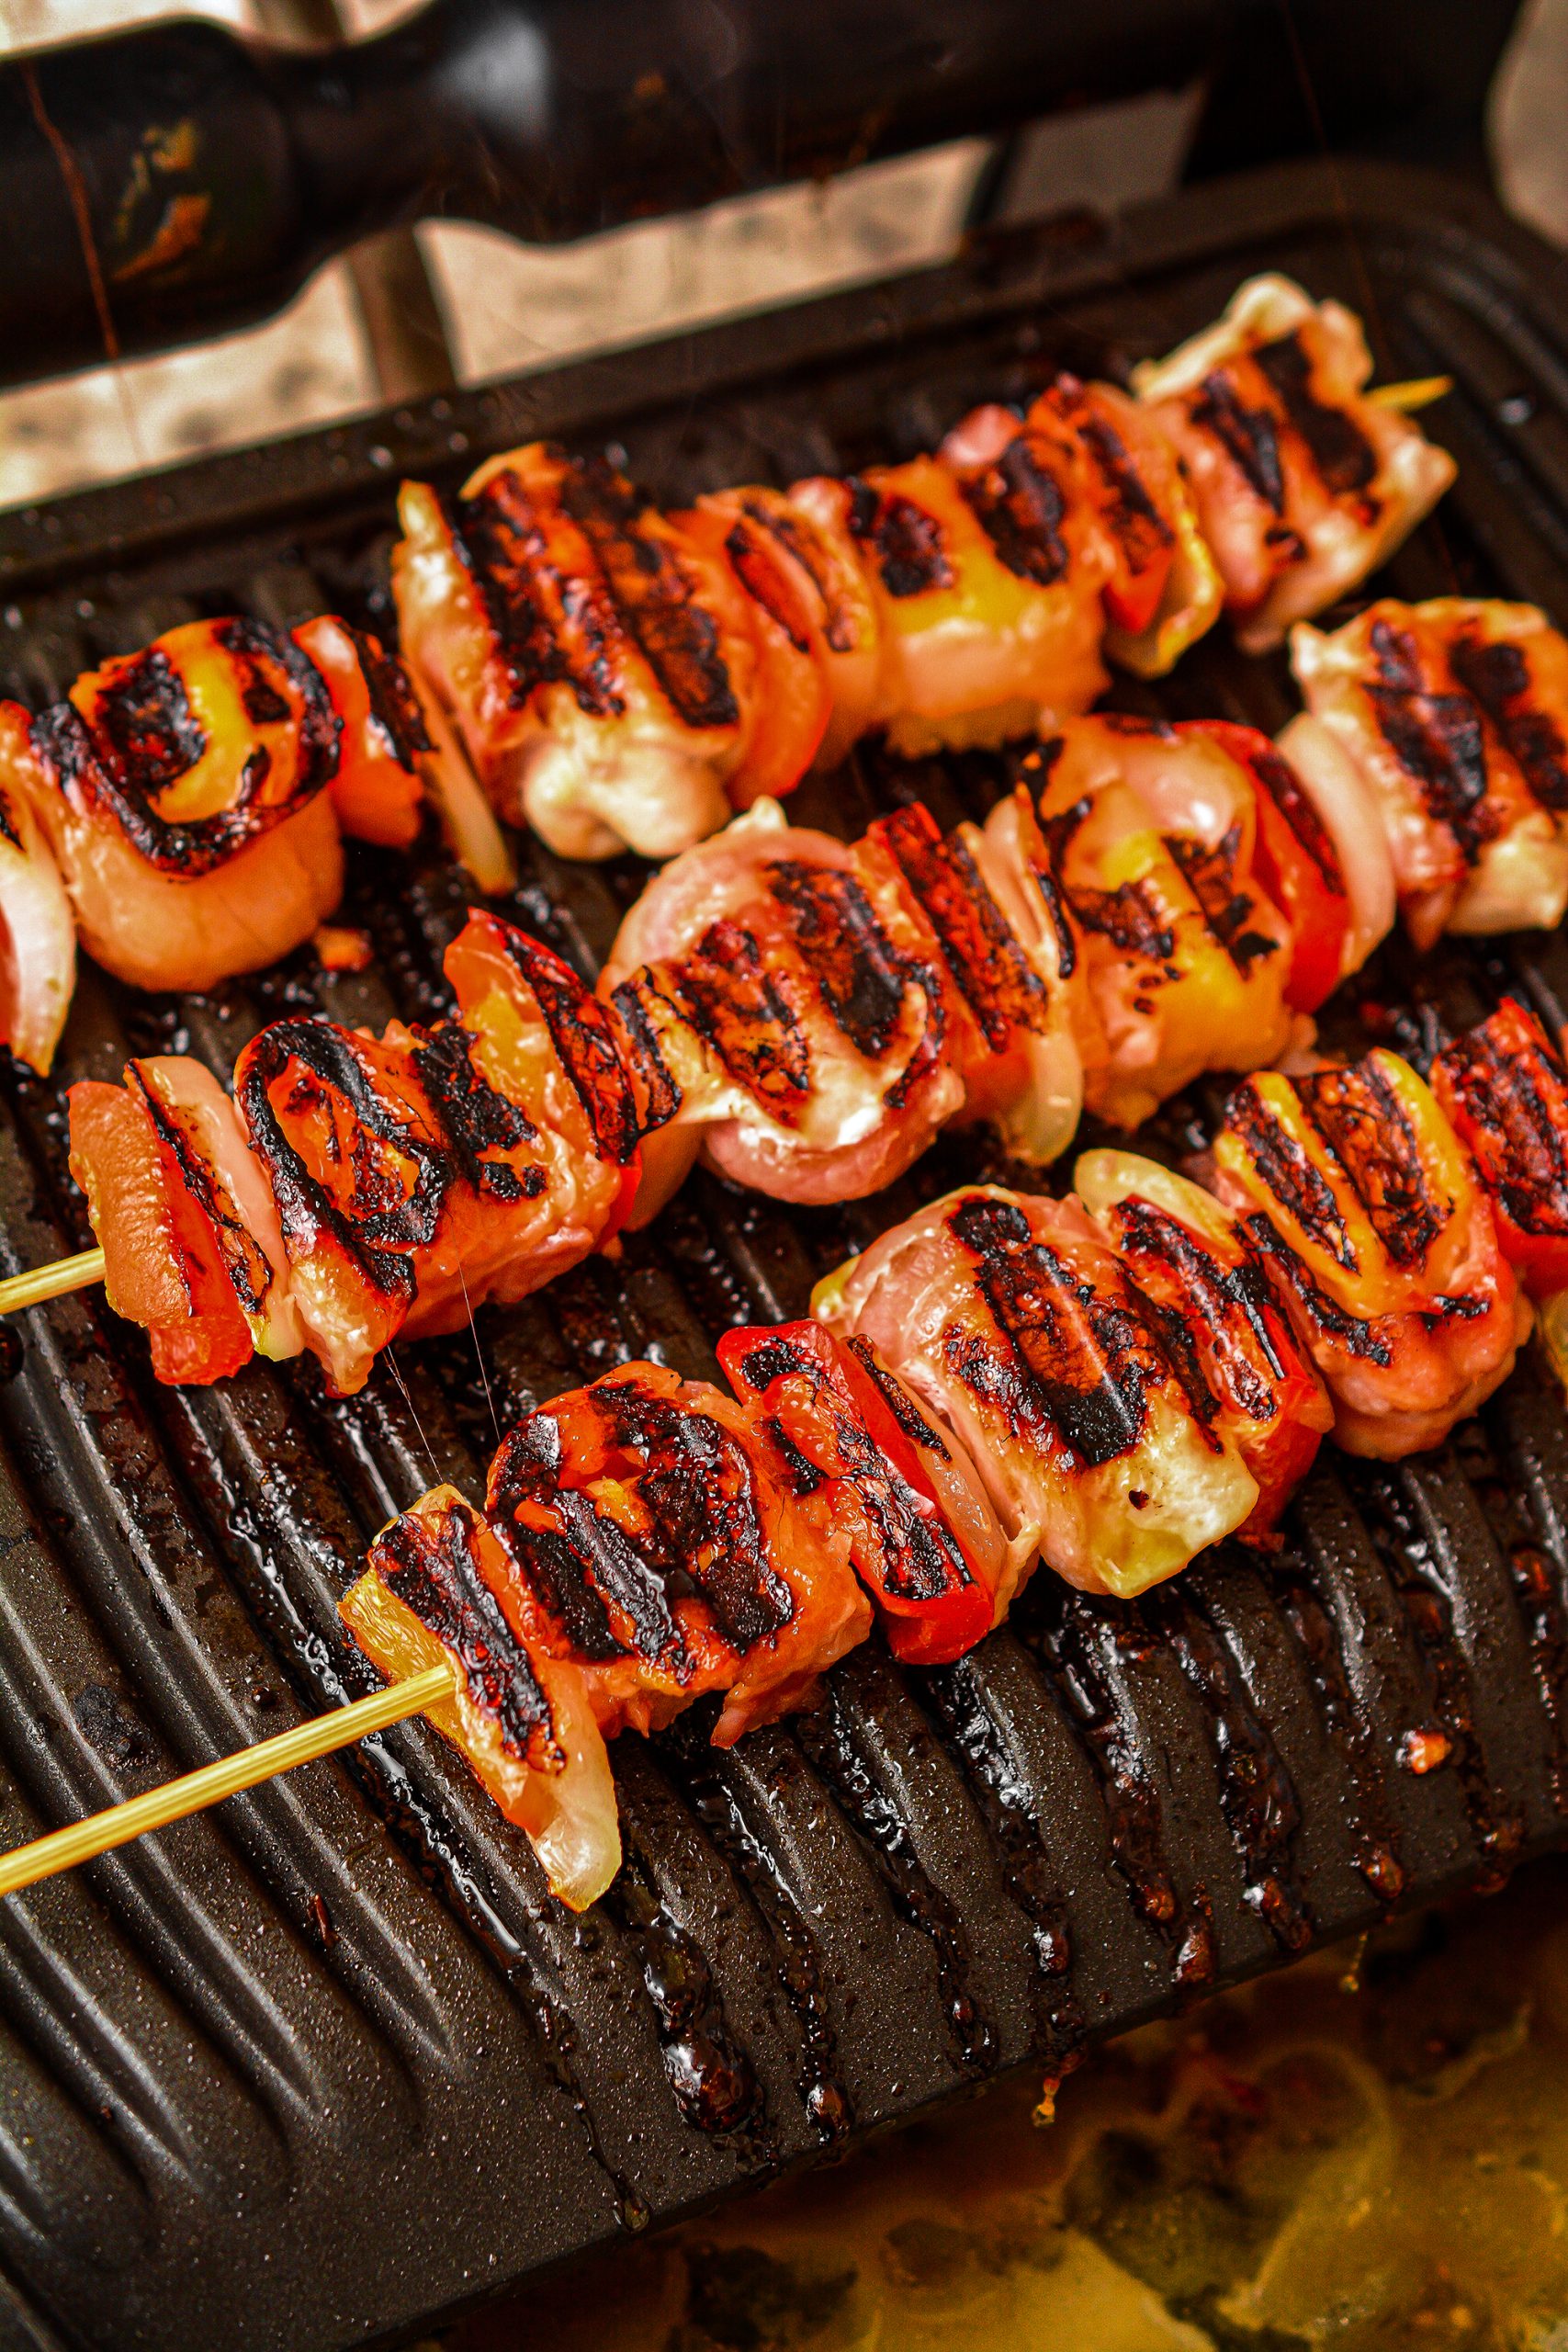 Grill until the chicken is cooked through and the bacon is crispy.